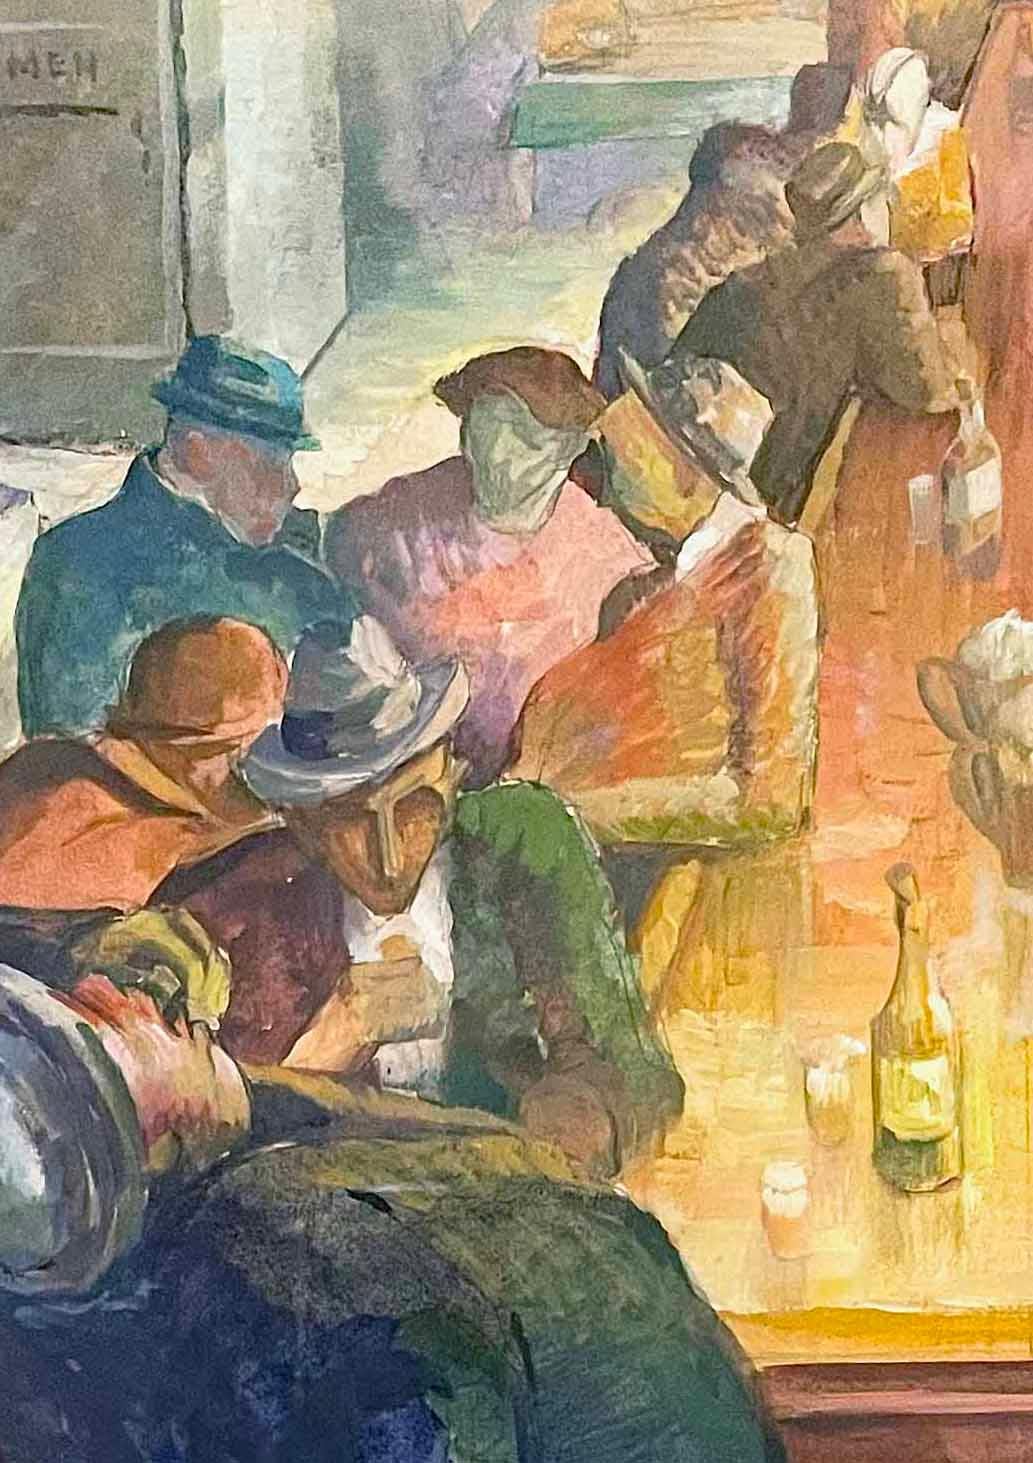 This quintessential Depression-era scene depicts a series of men at a tavern, slouching or leaning against the bar's edge and quaffing shots of hard liquor.  The bar's occupants seem to be convivial and conversational, and the large man in the